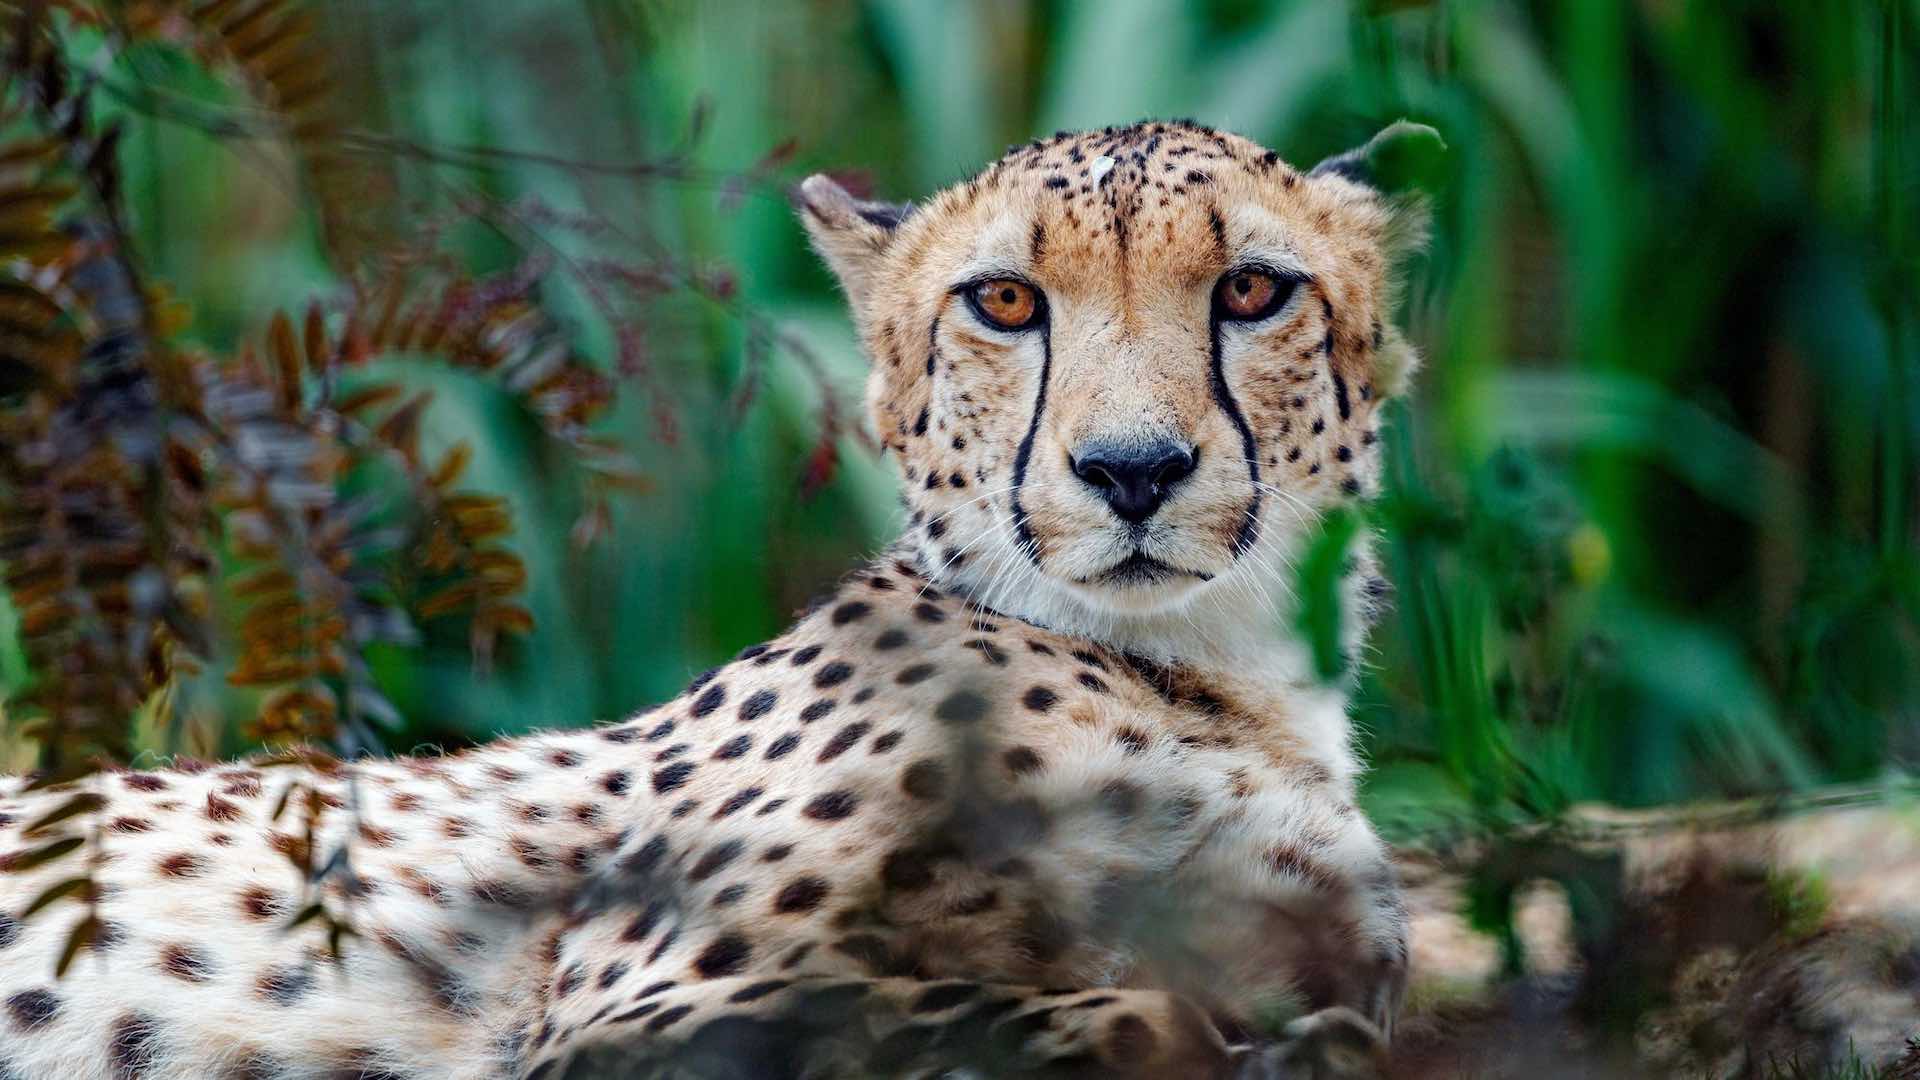 Endangered leopards and pangolins used in Chinese medicines, report reveals